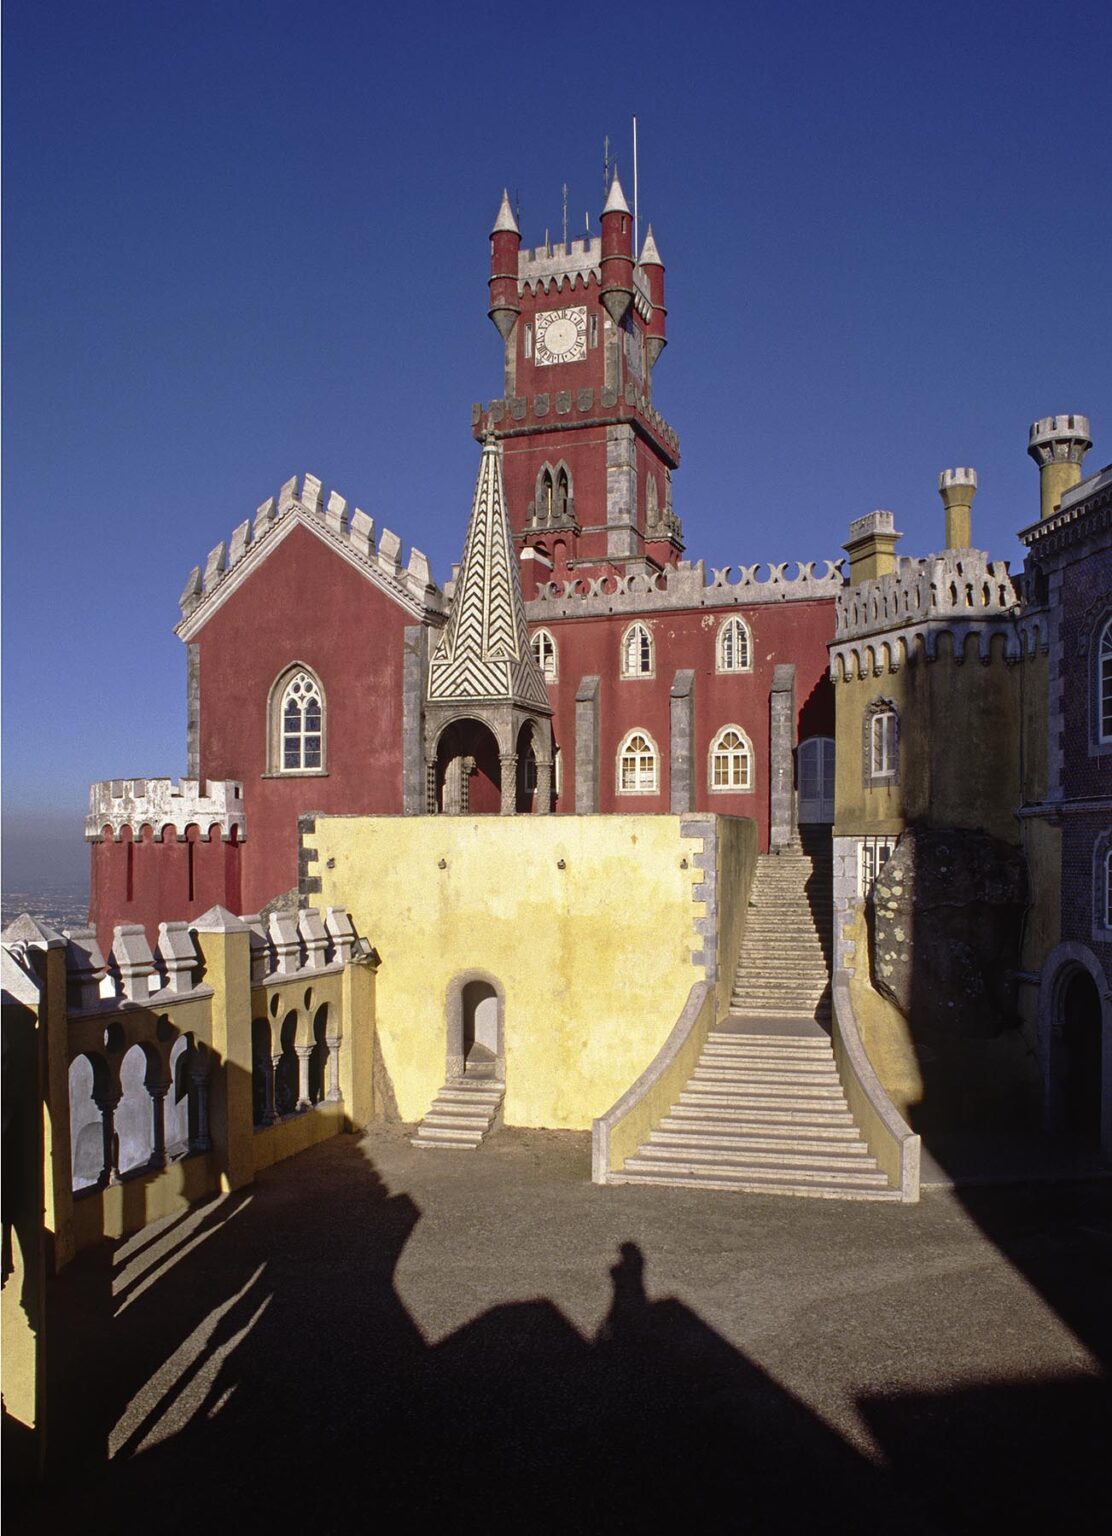 The PENA PALACE (CASTLE) above SINTRA is a fine example of PORTUGUESE ROMANTIC ARCHITECTURE - built in 1800's in